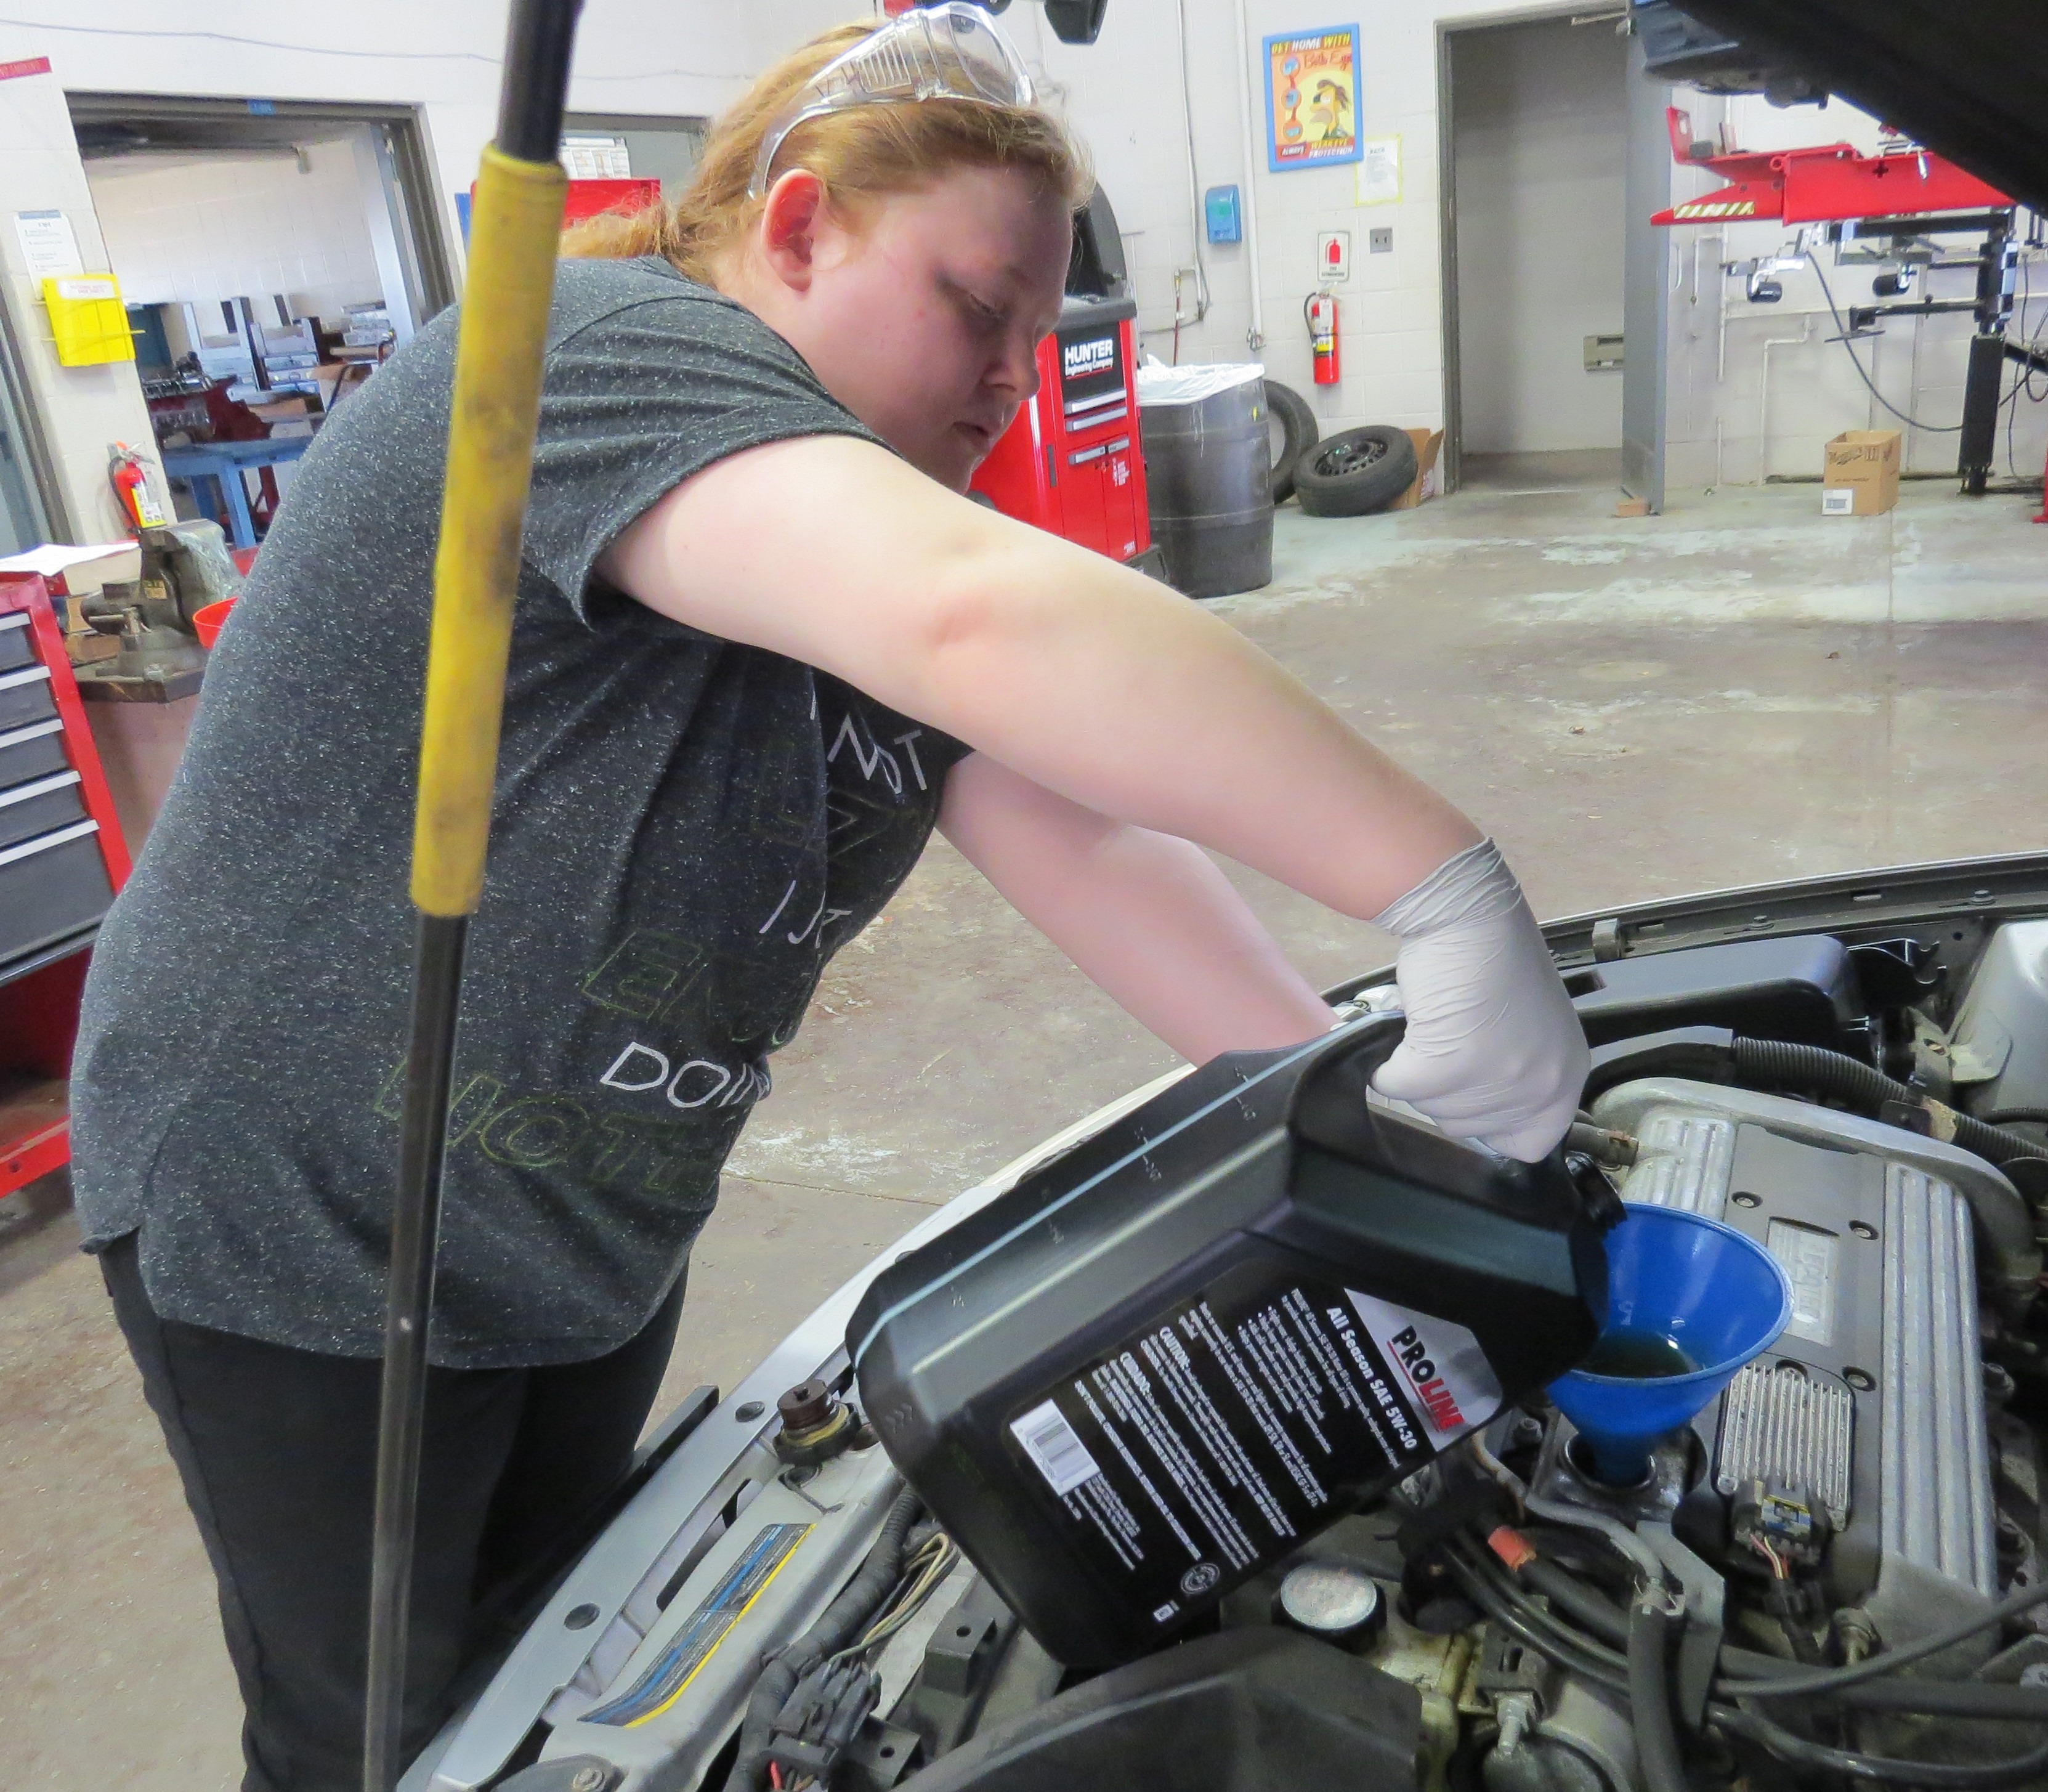 A young woman ouring oil into a car engine.